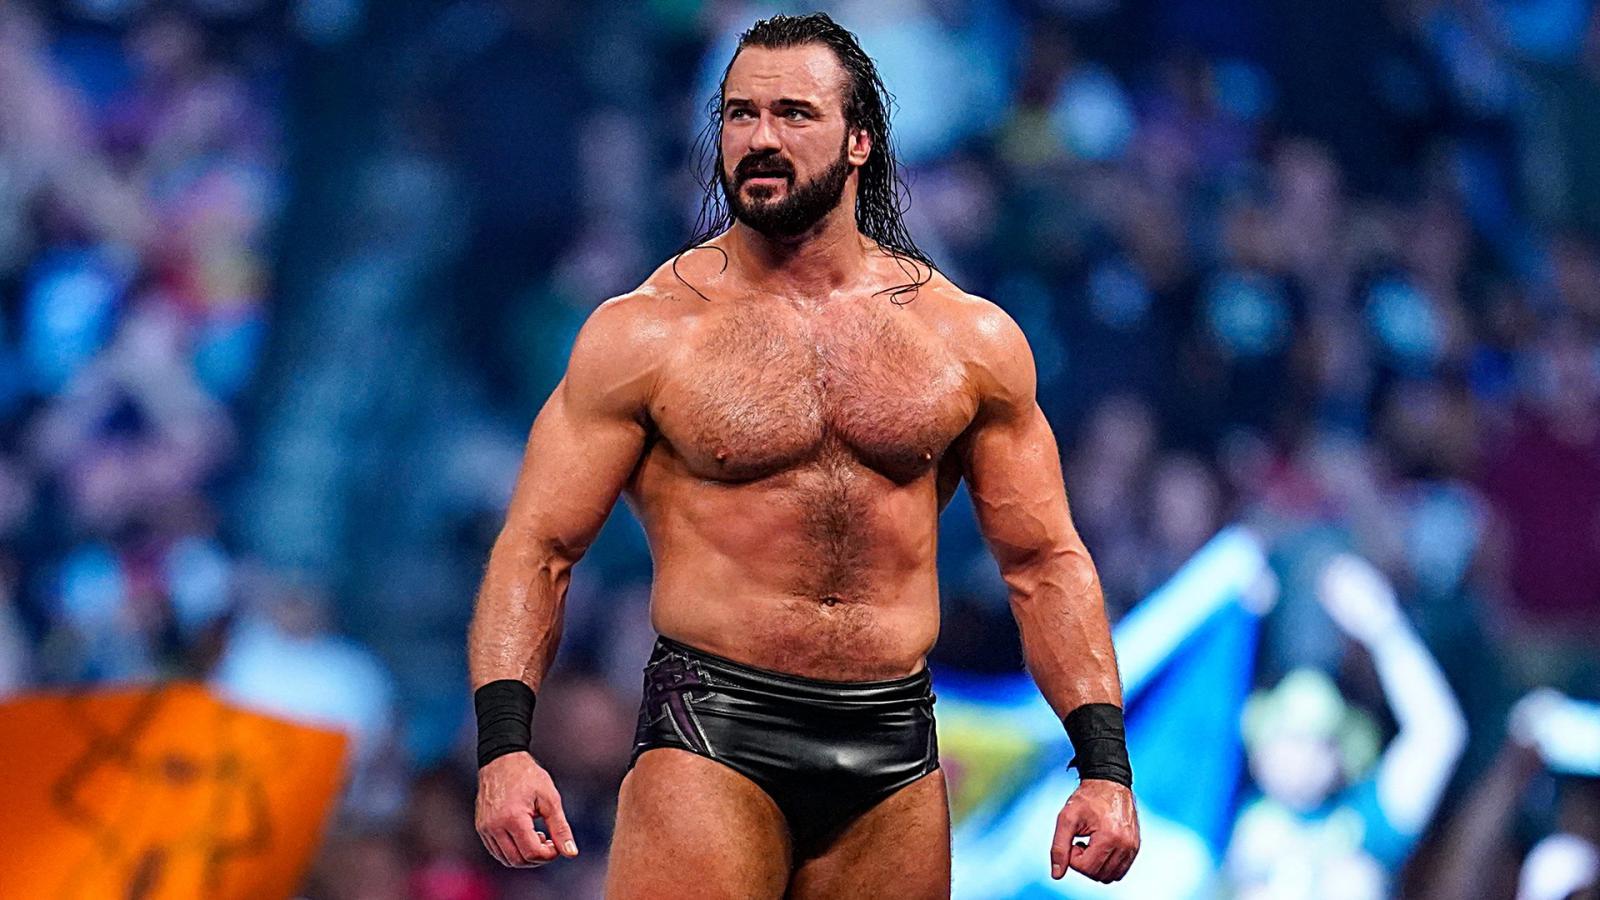 Drew McIntyre Still Not Medically Cleared, Will Miss WWE Holiday Tour